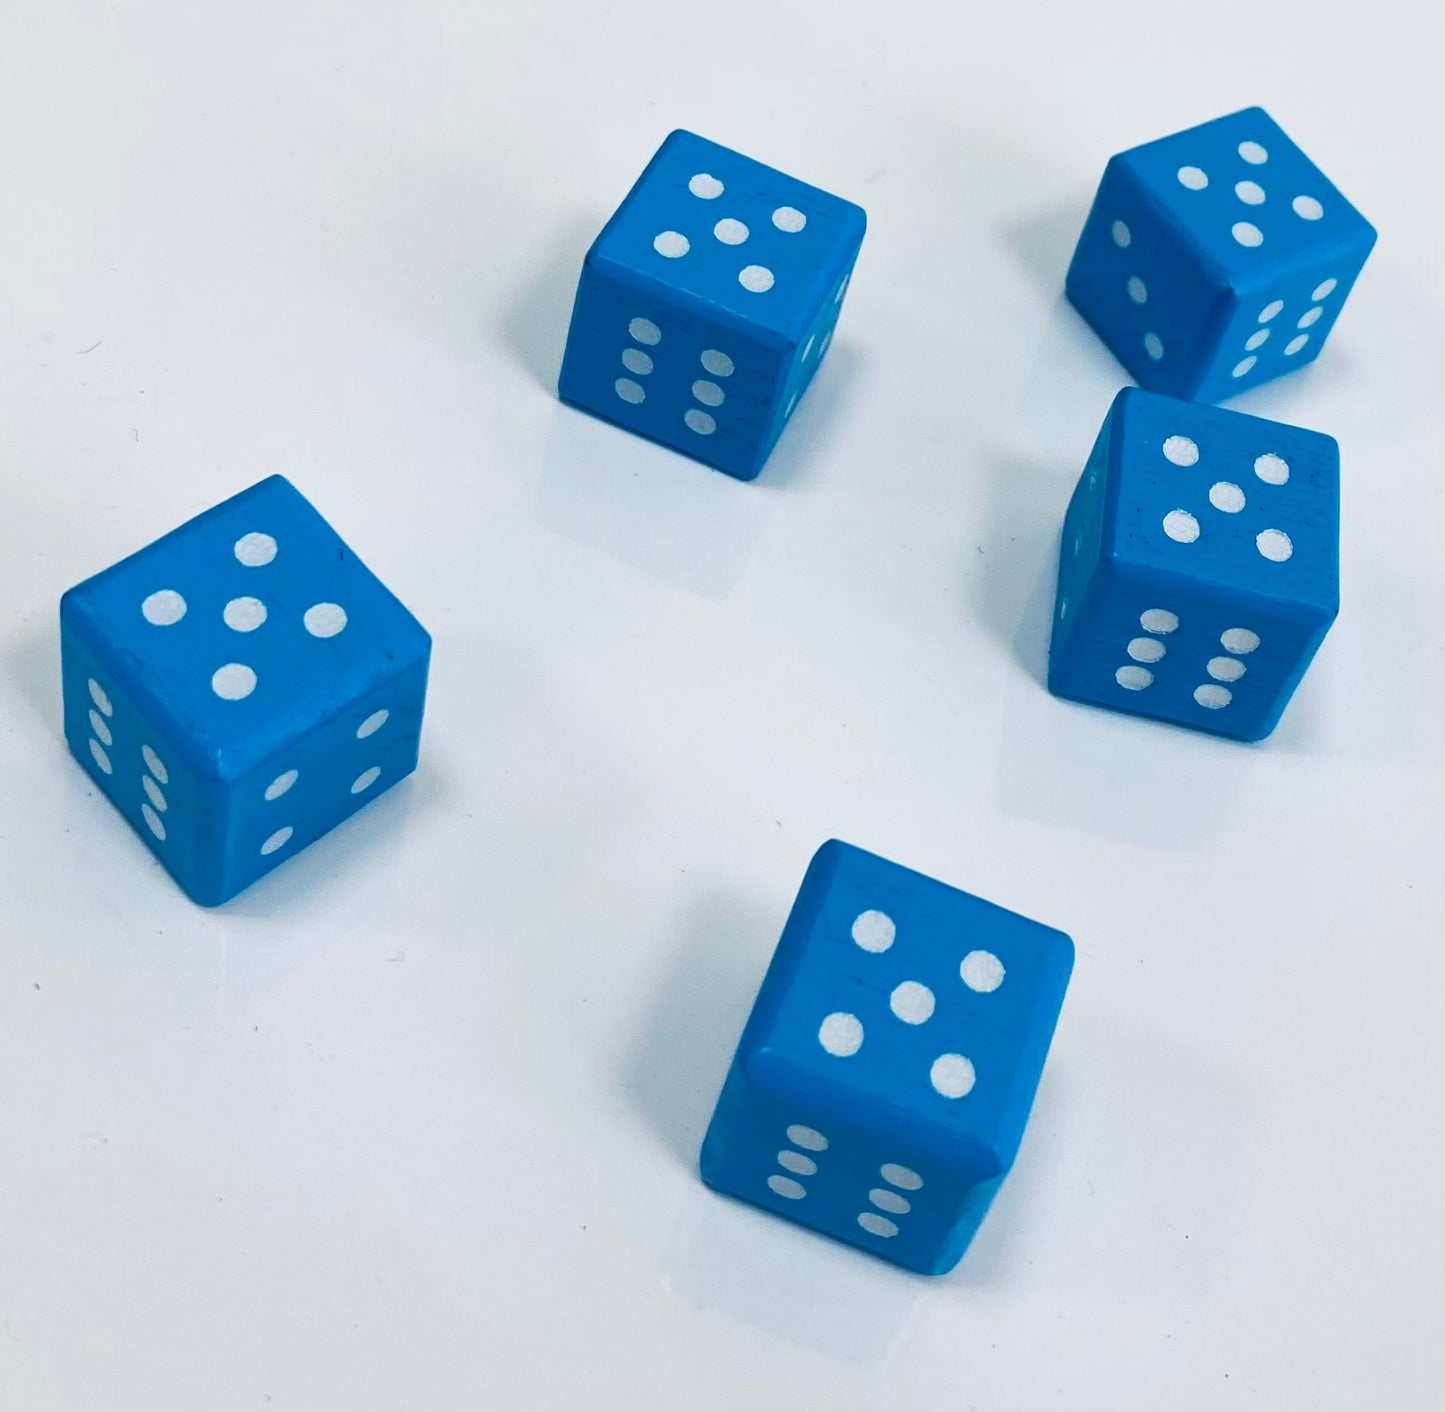 Sky Blue Floating Wood Dice - 5 Pack with EVA Case